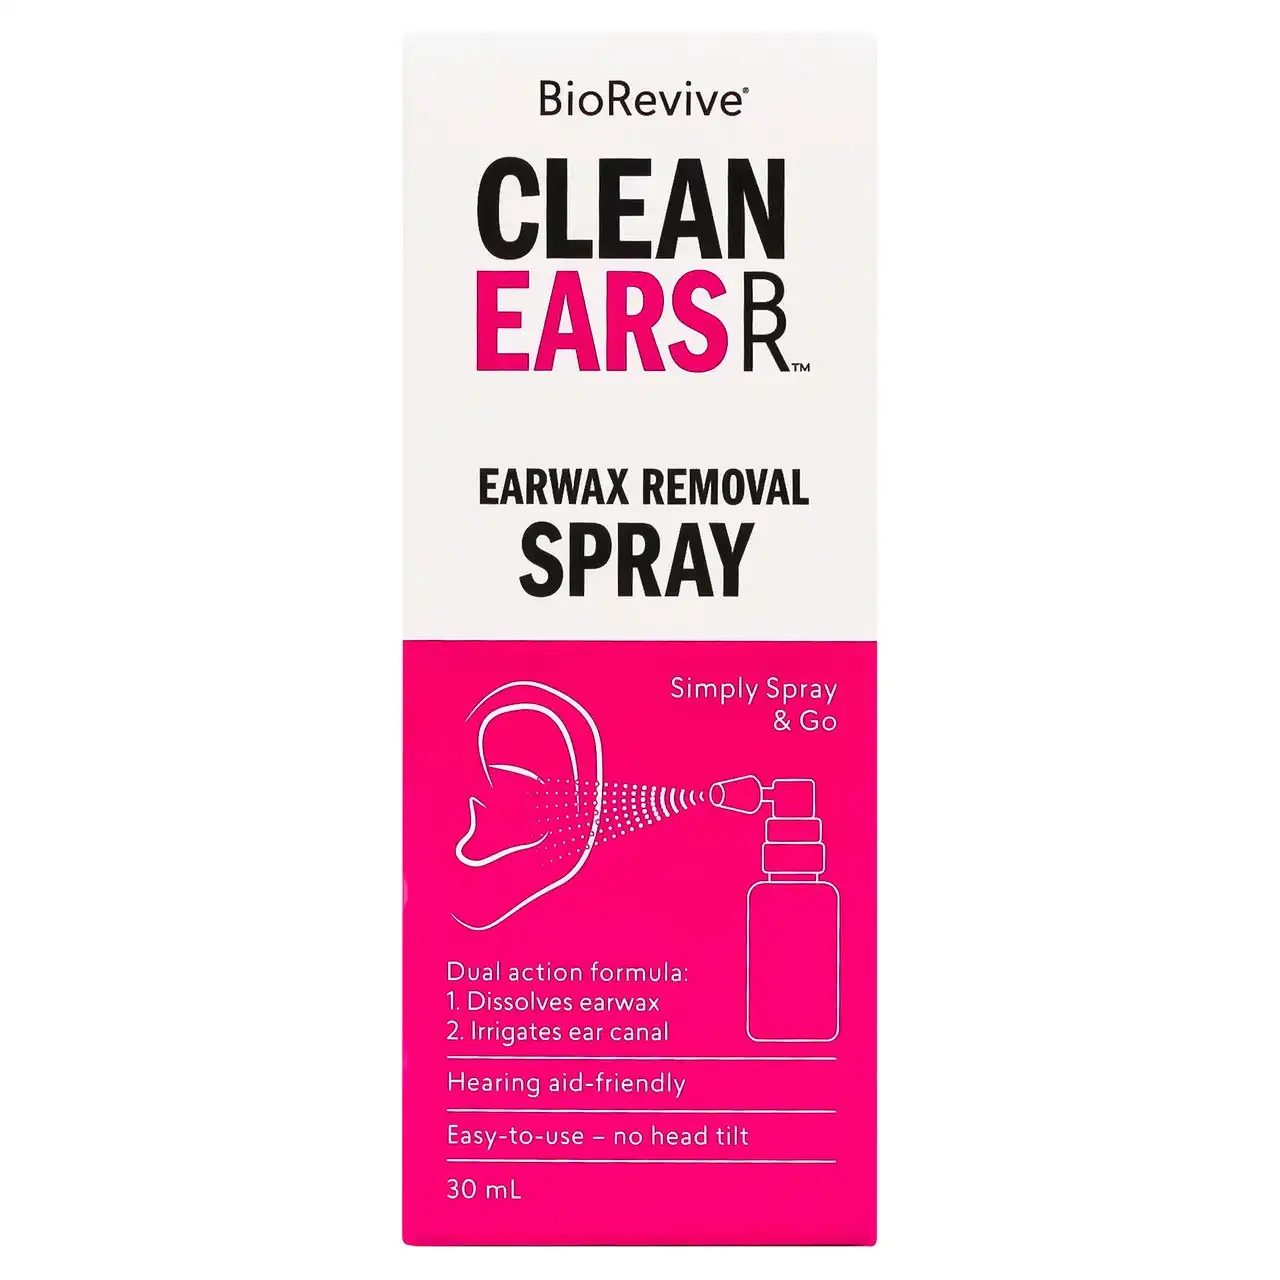 BioRevive CleanEars Earwax Removal Spray 30mL